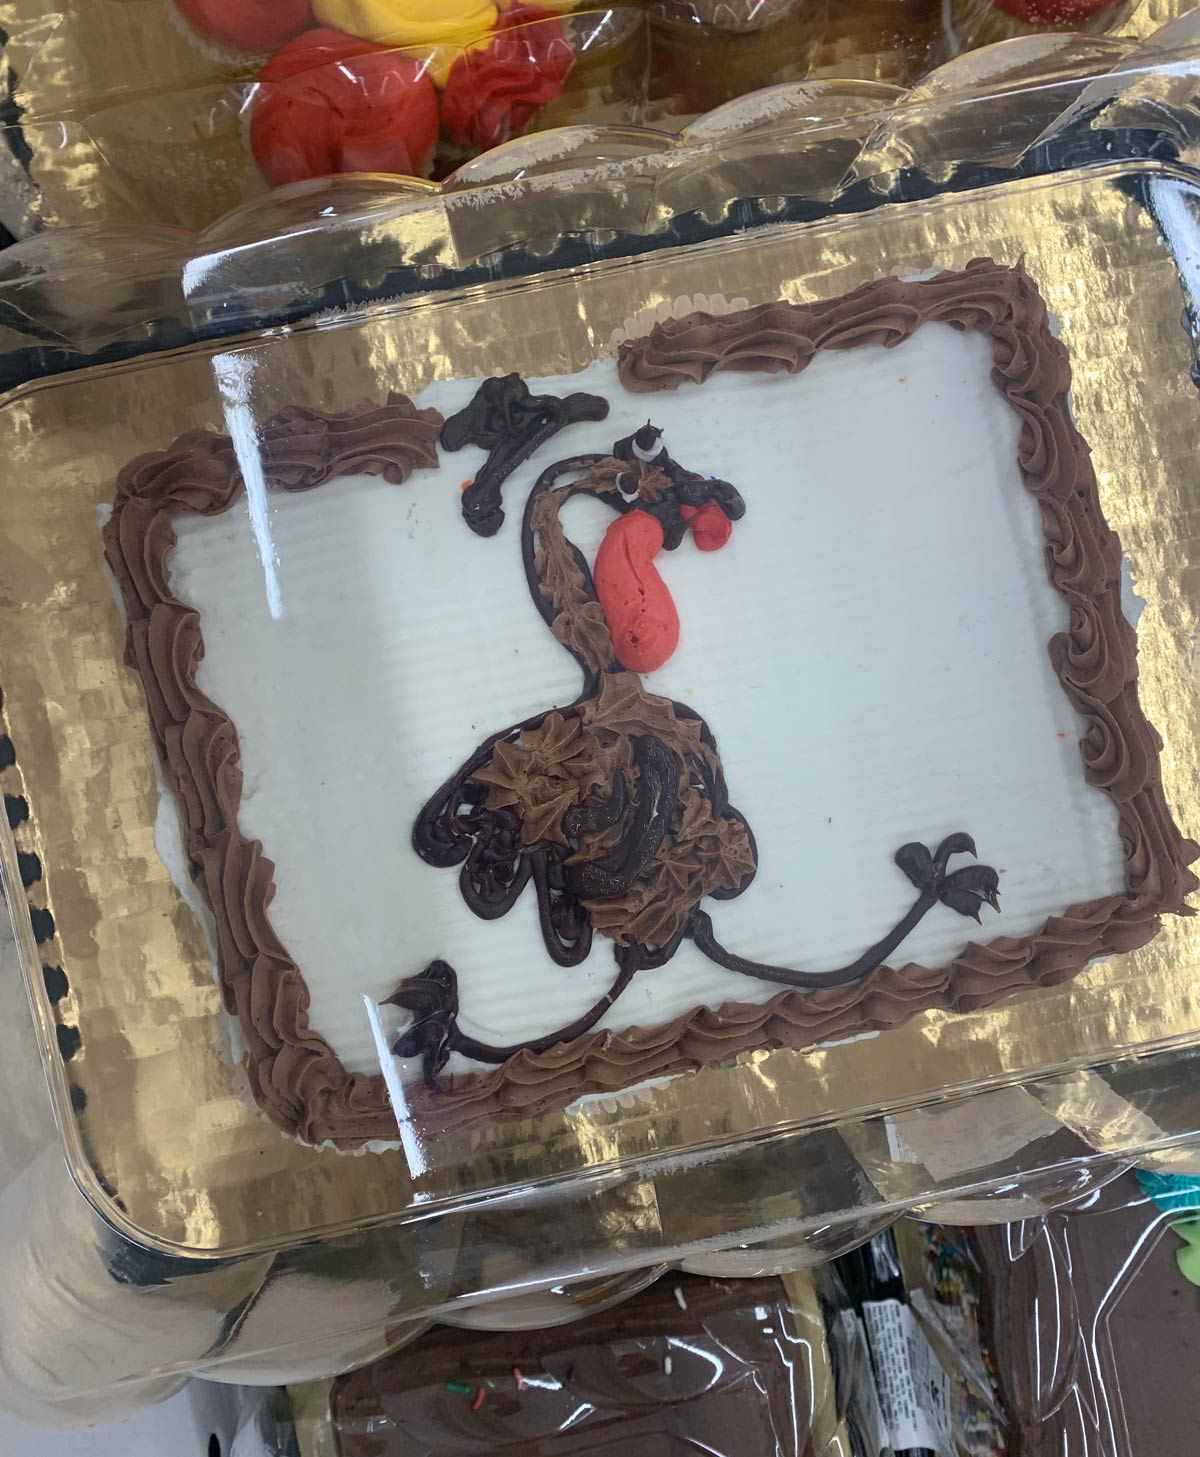 Found this year’s Thanksgiving cake!